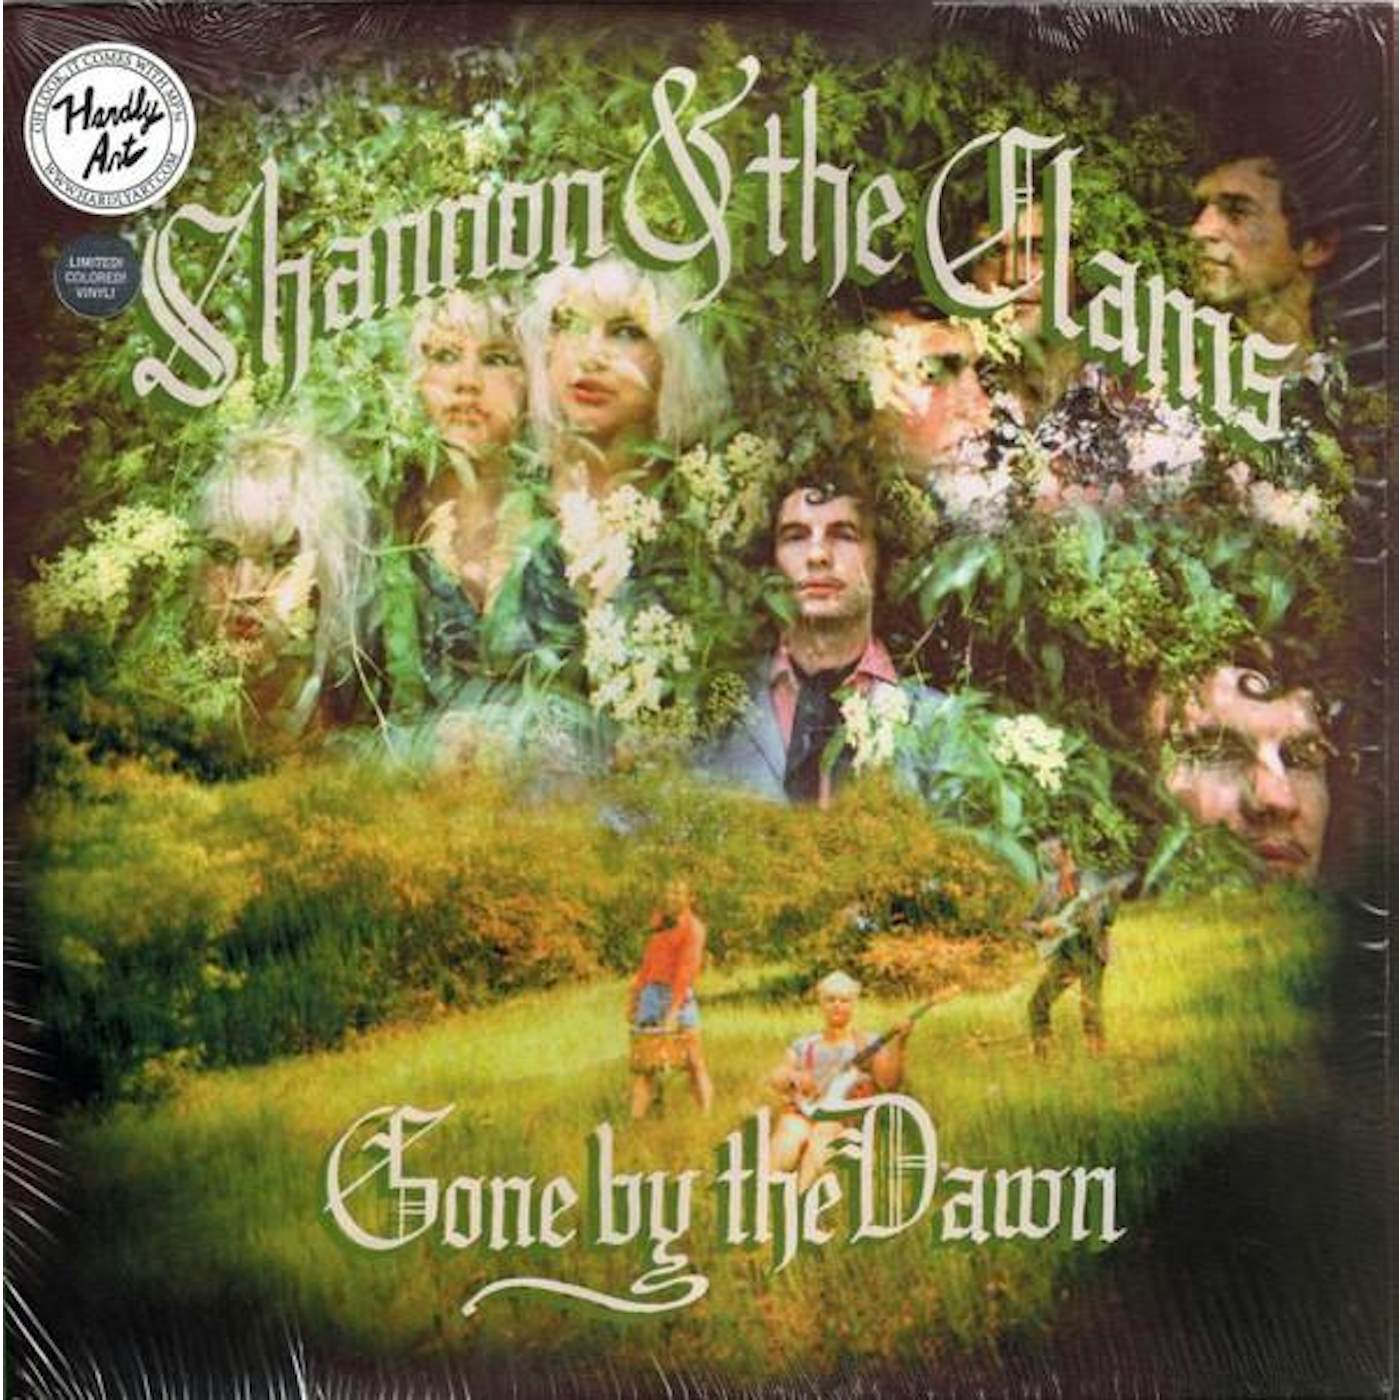 Shannon & The Clams GONE BY THE DAWN (DL CARD) Vinyl Record